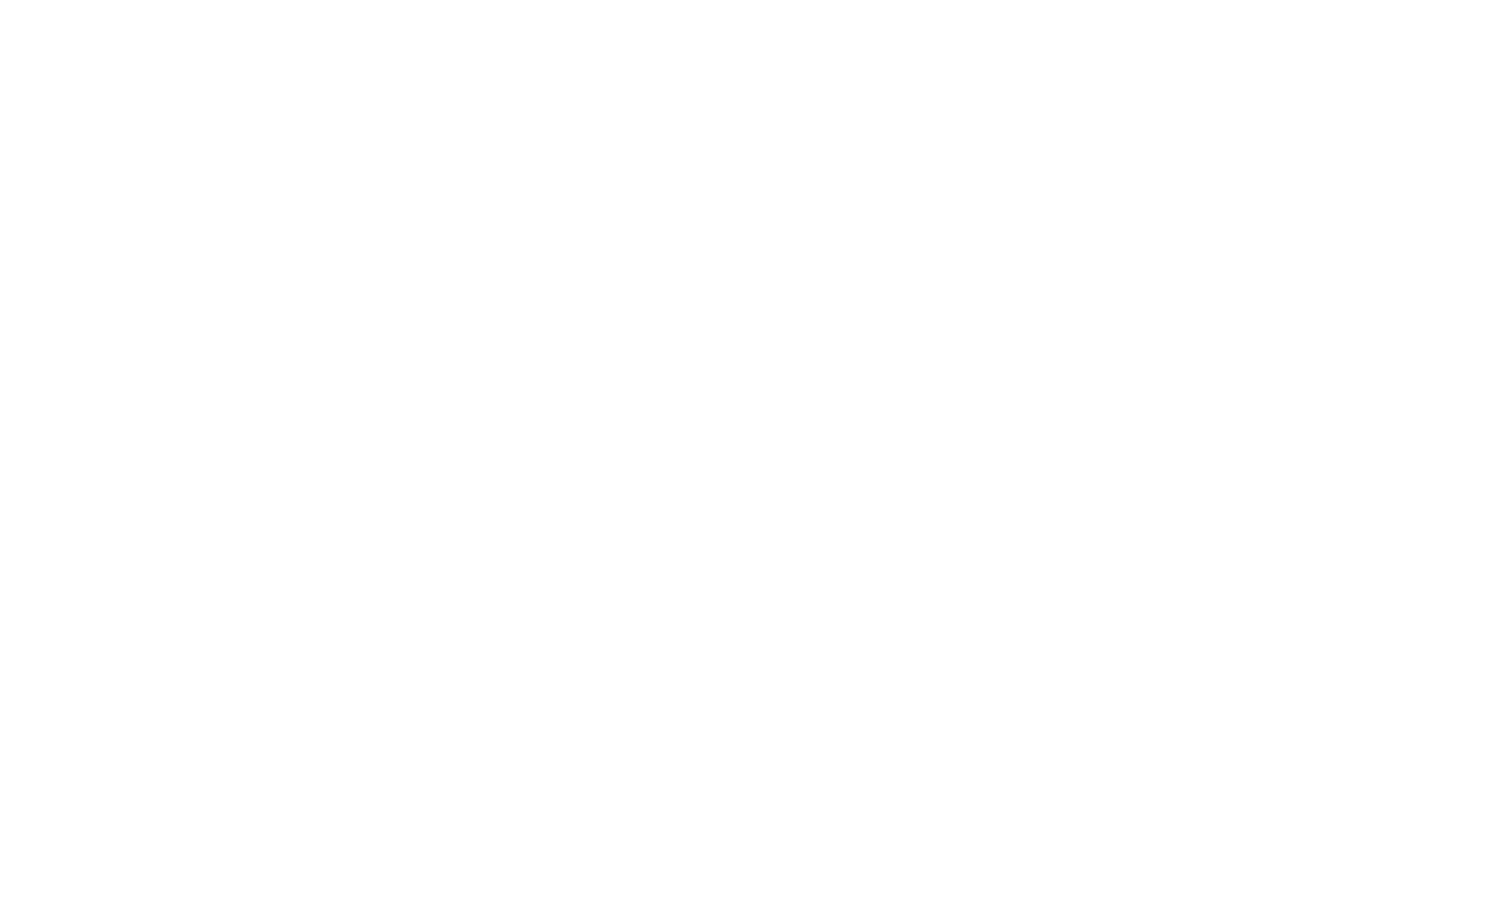 REV Aesthetics ∙ A Modern Approach to Aesthetics + Skincare ∙ Located in Camp Hill, PA